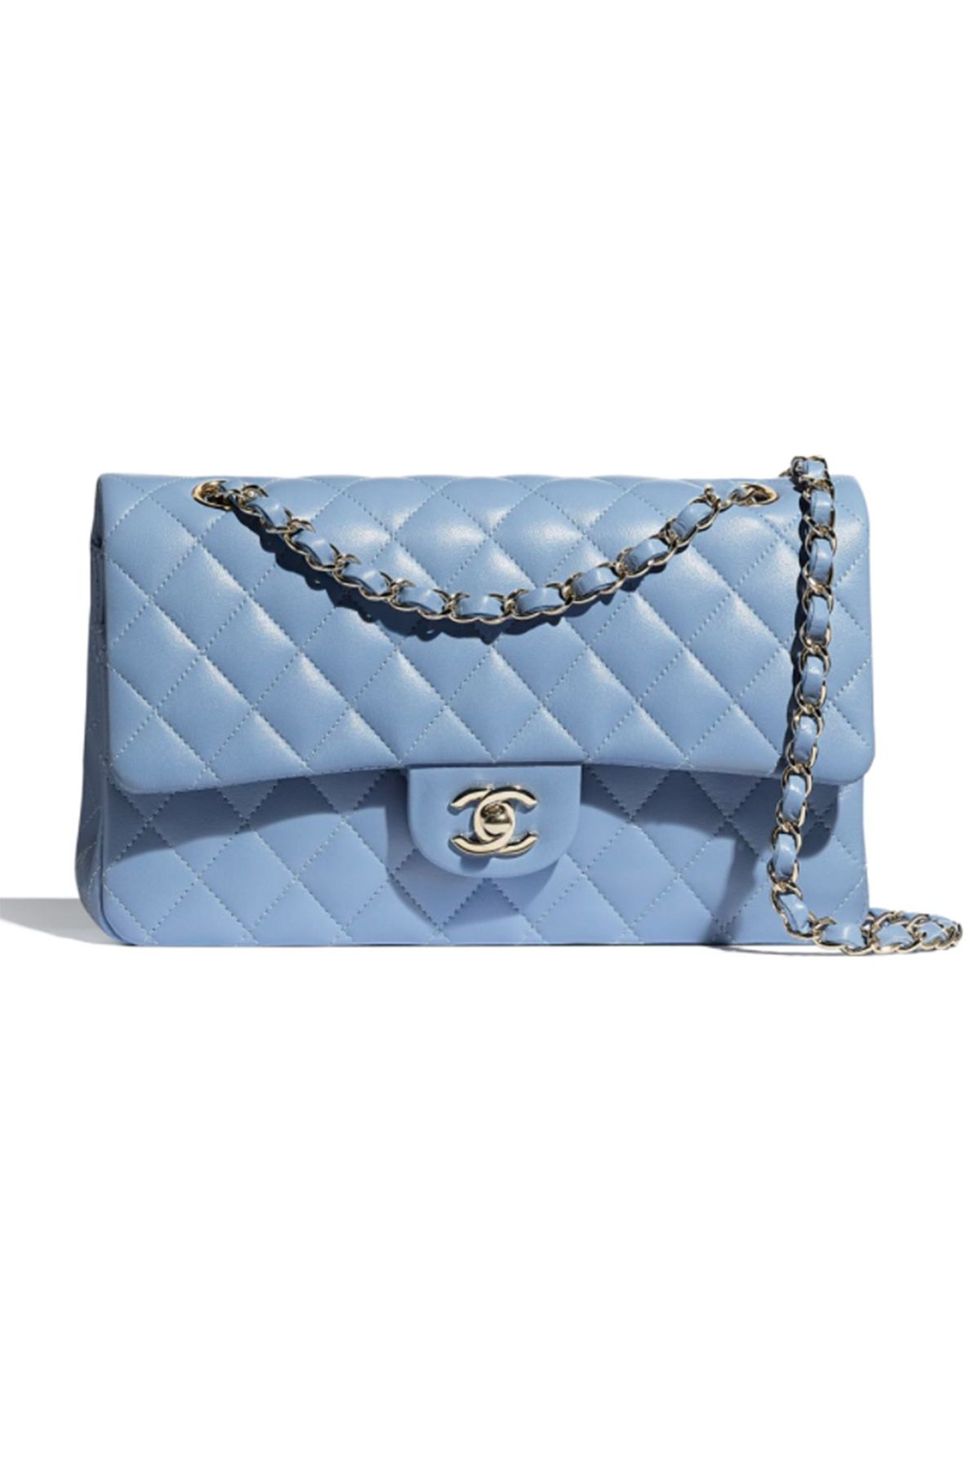 The 18 Classic Chanel Bags That Belong in Every Collection - Best